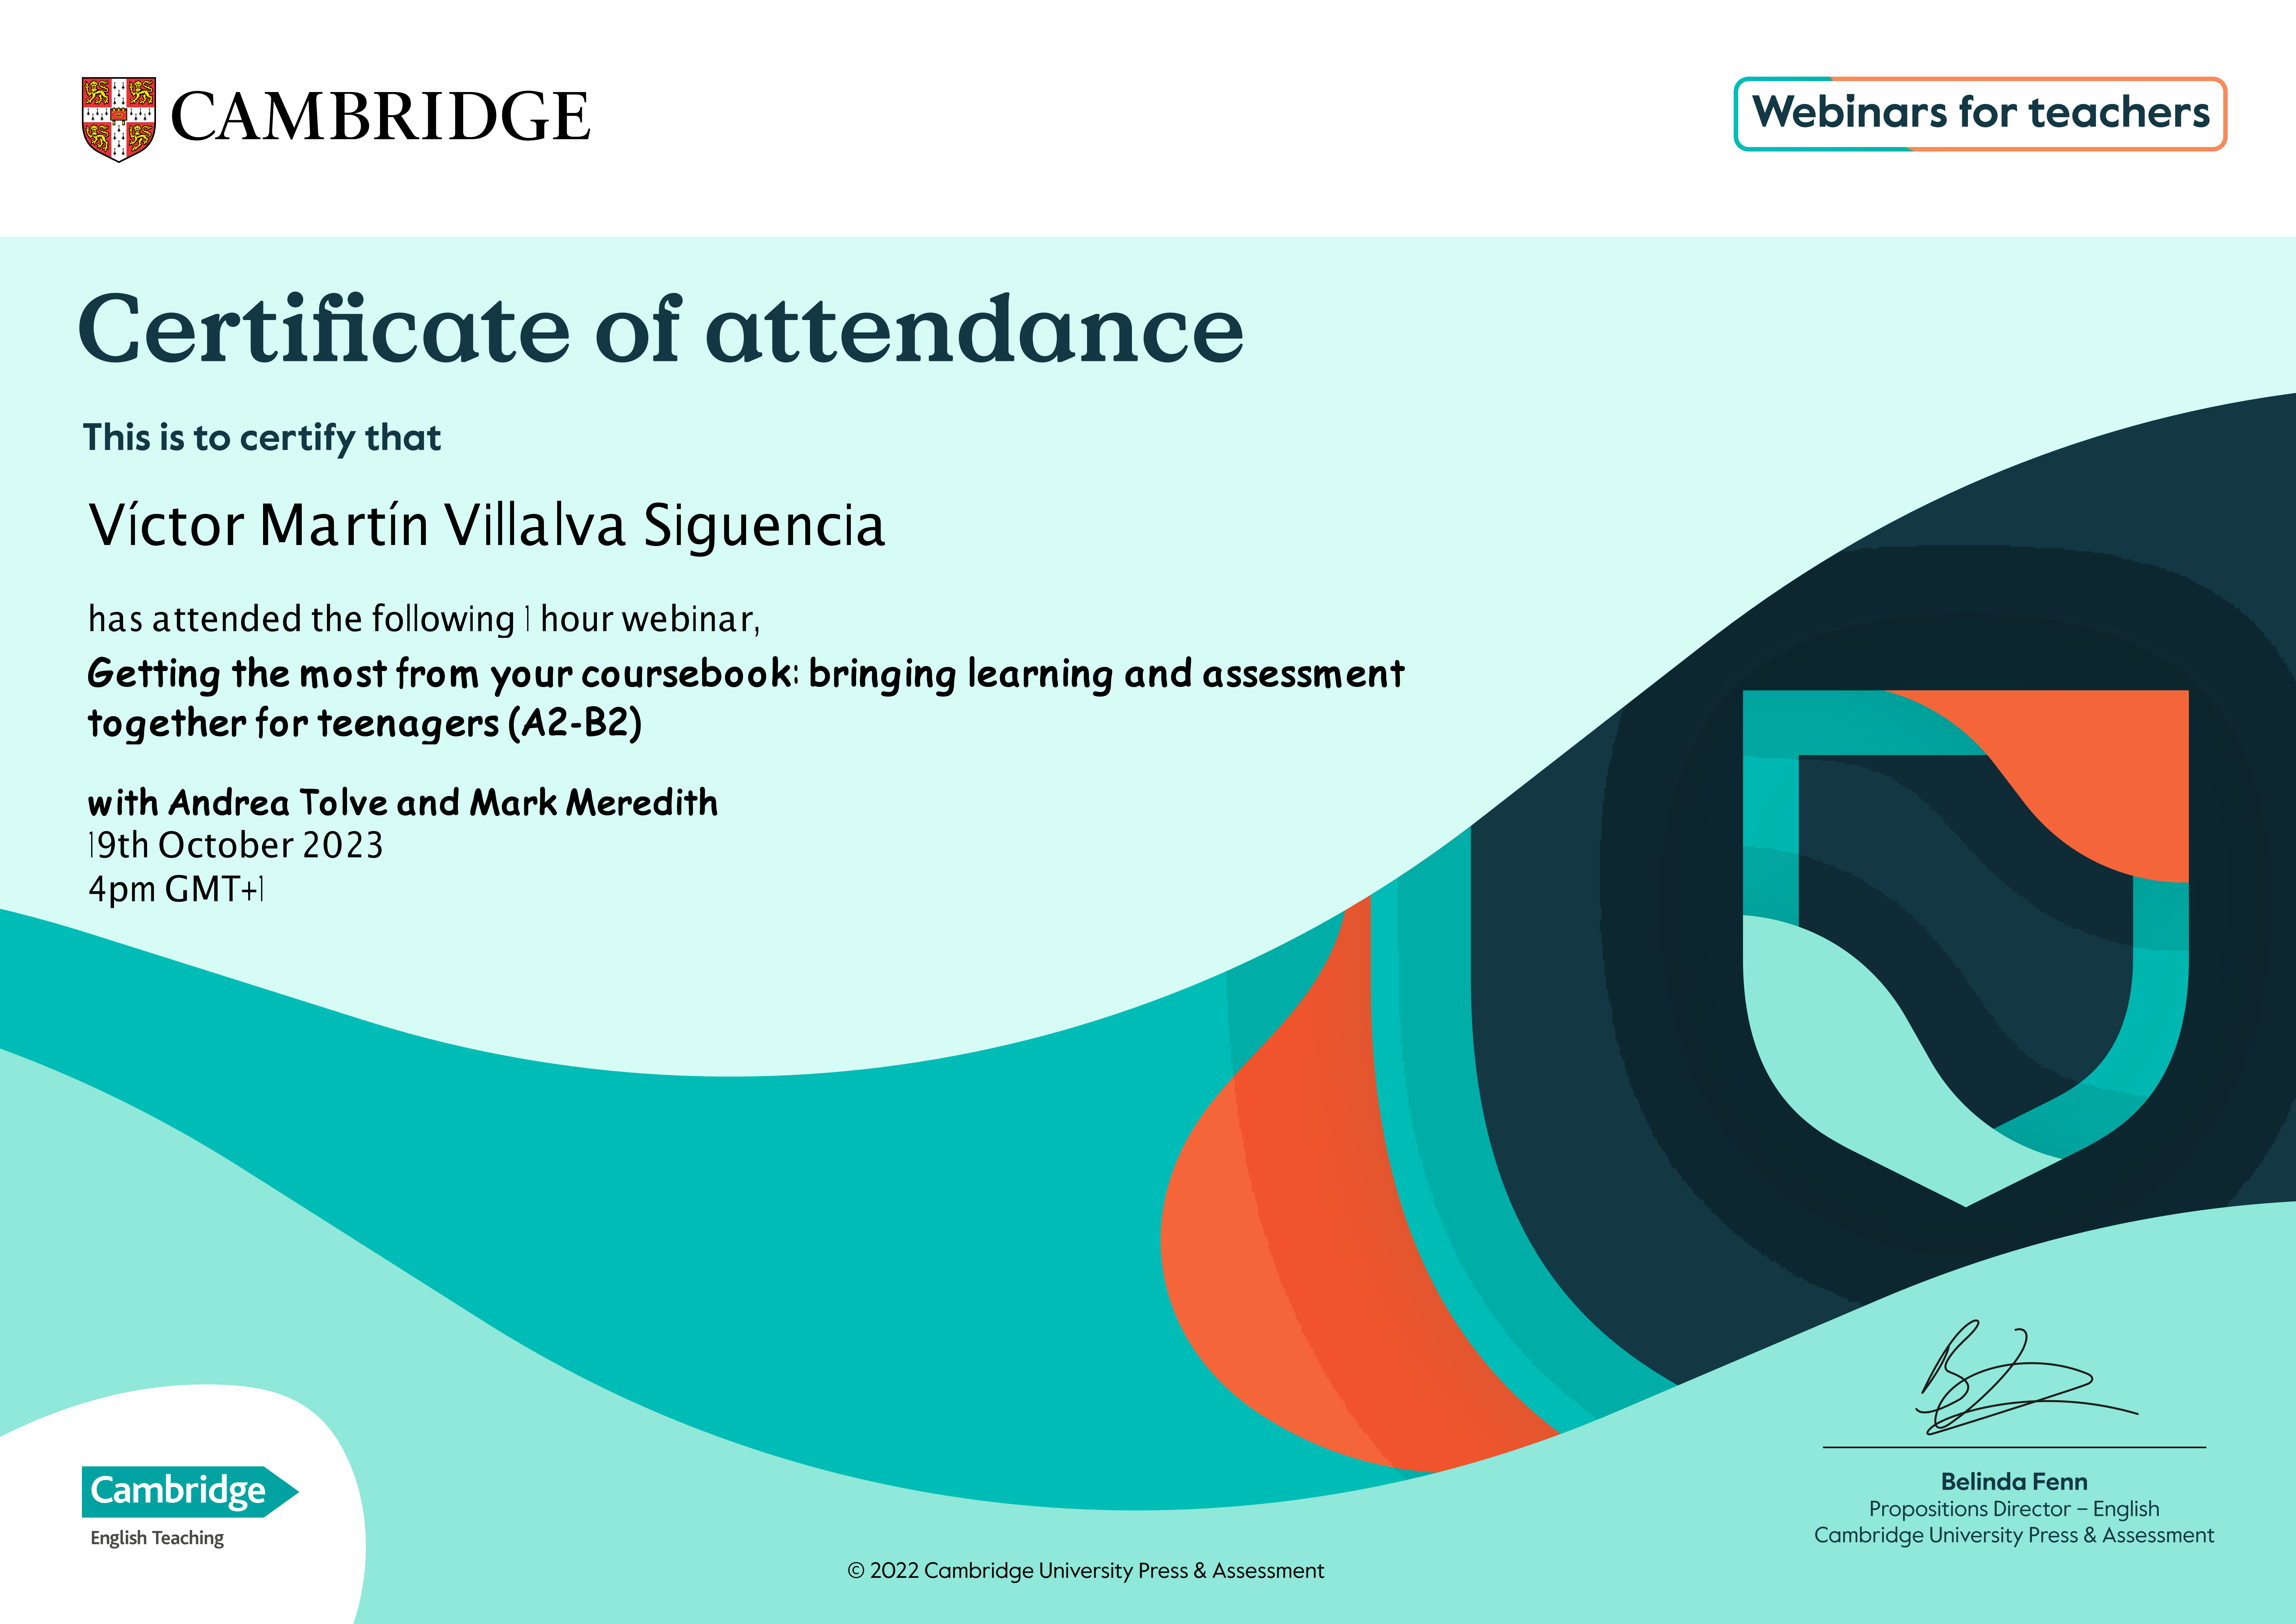 Ta CAMBRIDGE | Webinars for teachers

Certificate of attendance

This is to certify that

  
  
 
 
  
 
     
   

Victor Martin Villalva Siguencia

has attended the following | hour webinar,

Getting the most from your coursebook: bringing learning and assessment
together for teenagers (A2-B2)

with Andrea Tolve and Mark Meredith
19th October 2023
4pm GMT+]

=

Belinda Fenn
Propositions Director — English
Cambridge University Press & Assessment

   

Cambridge

English Teaching
© 2022 Cambridge University Press & Assessment